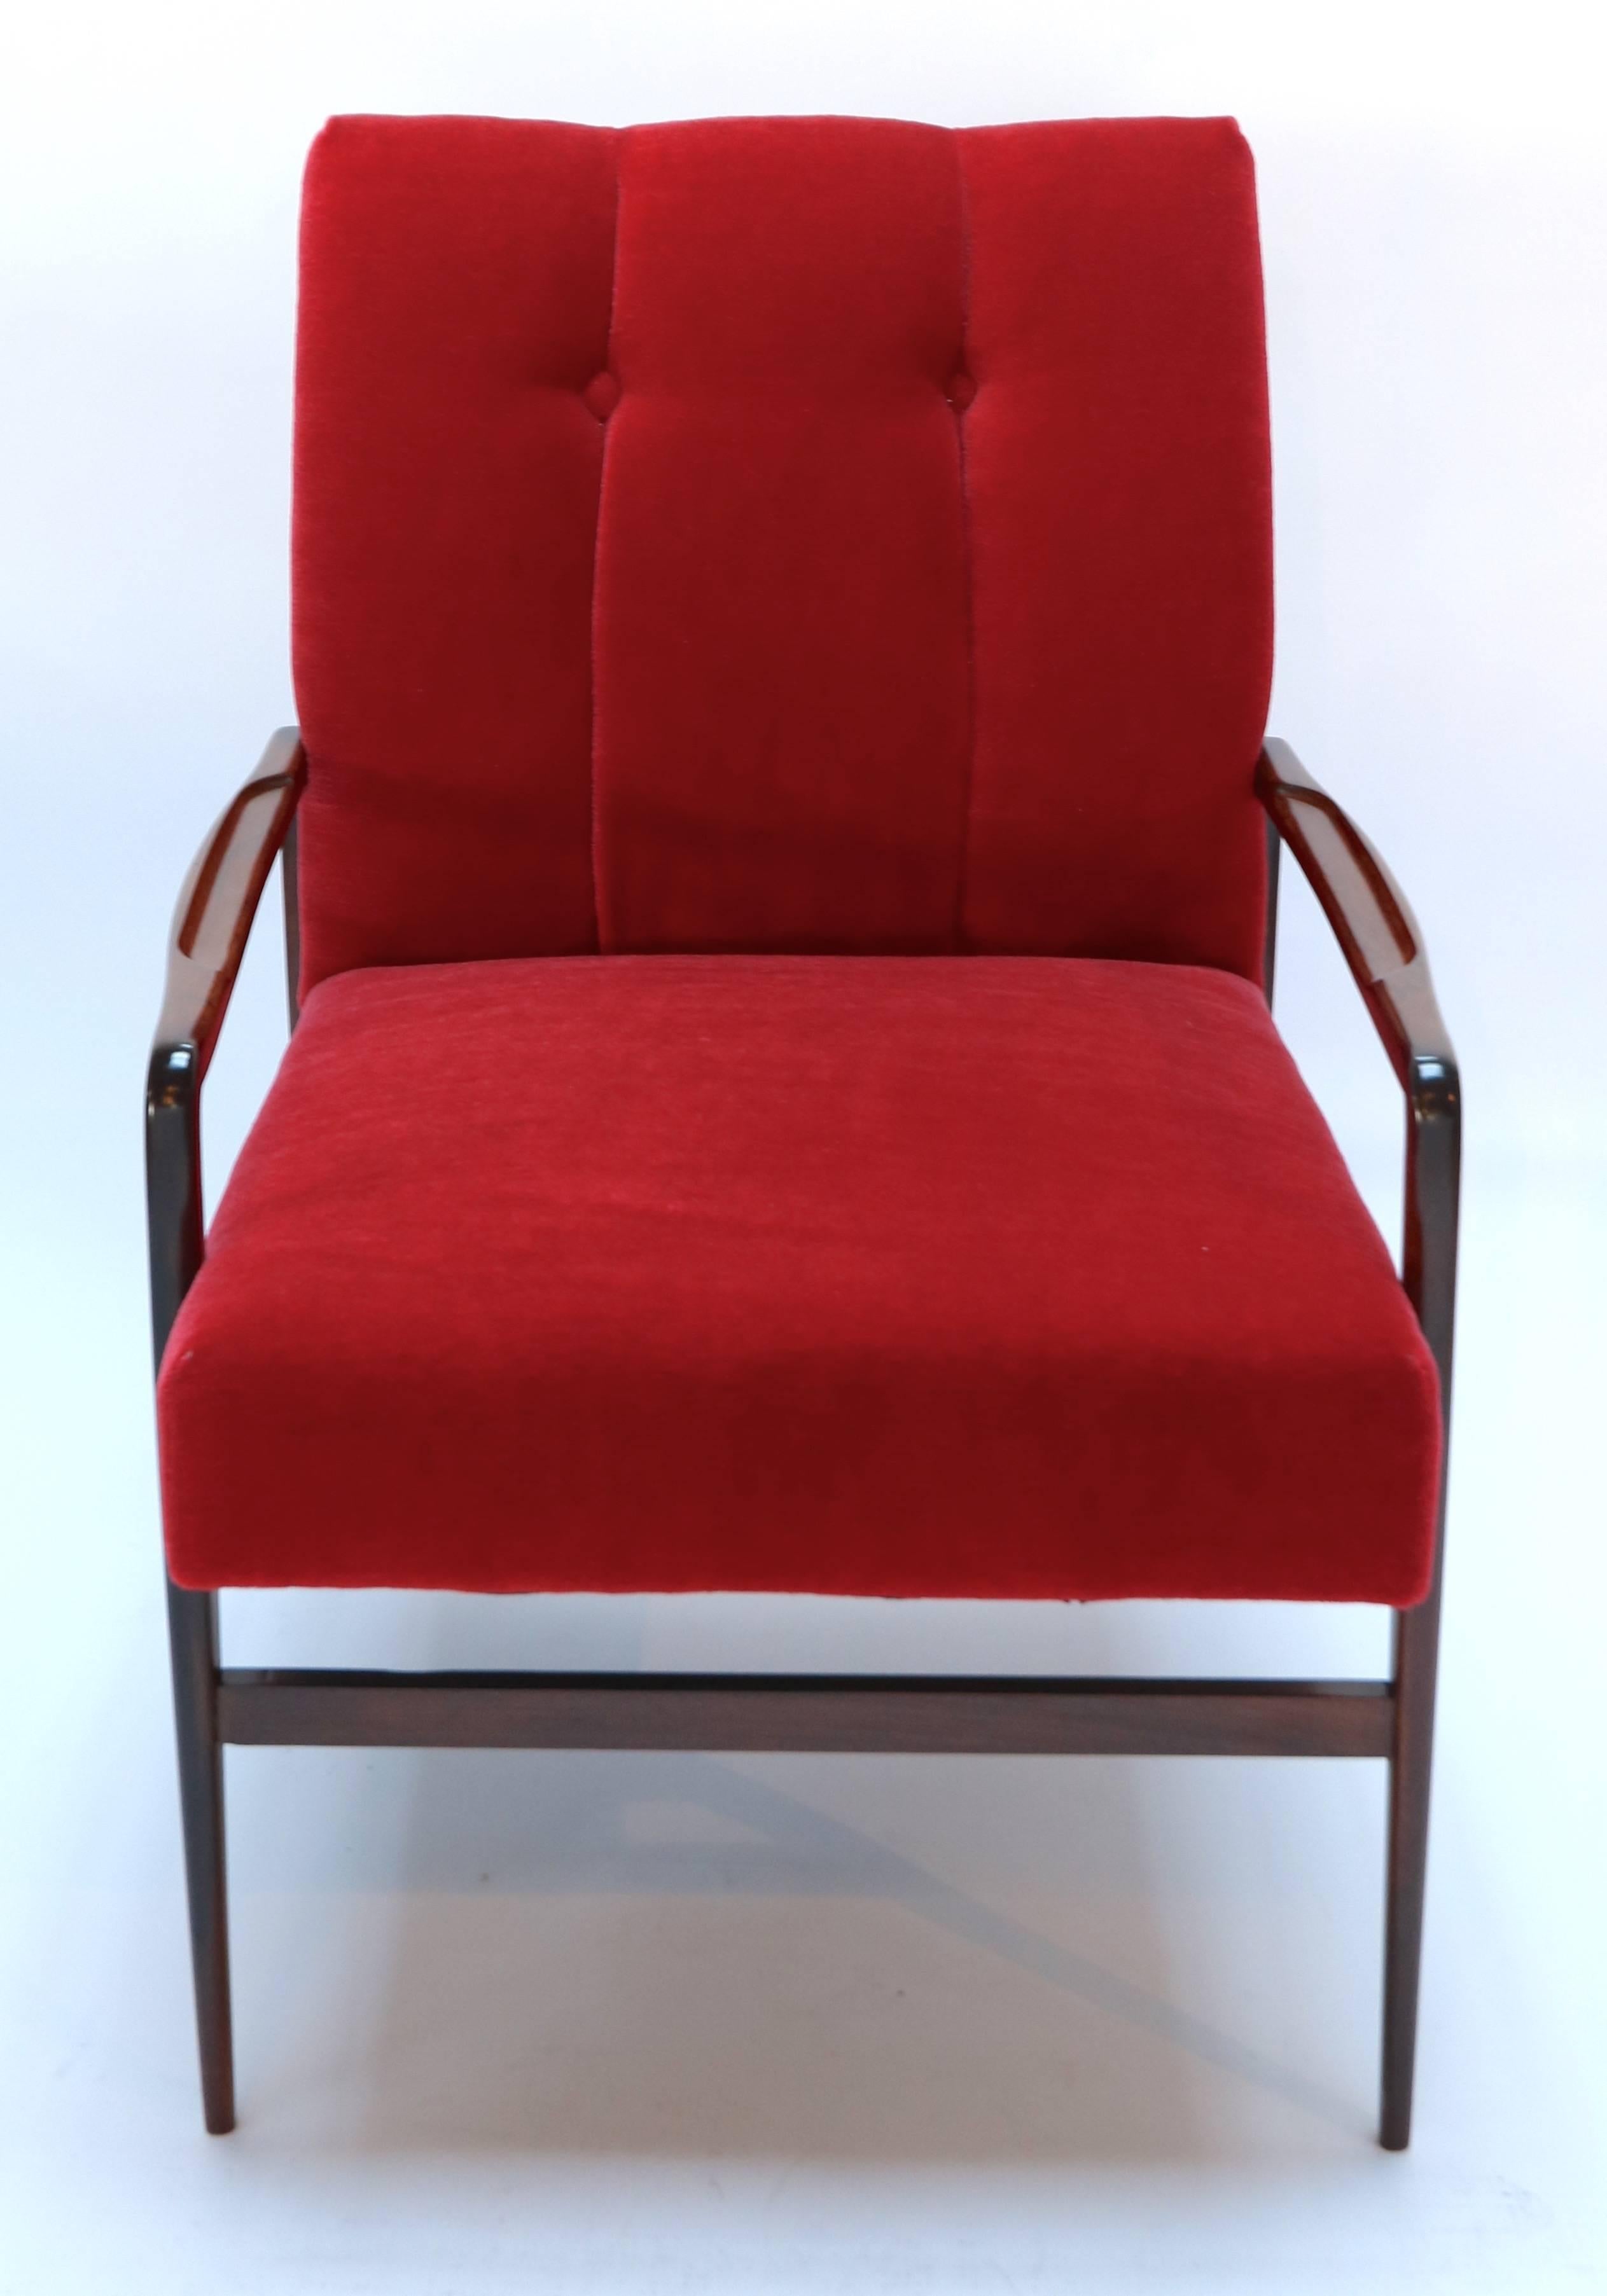 Pair of 1960s Brazilian Jacaranda Wood Armchairs in Red Mohair For Sale 1